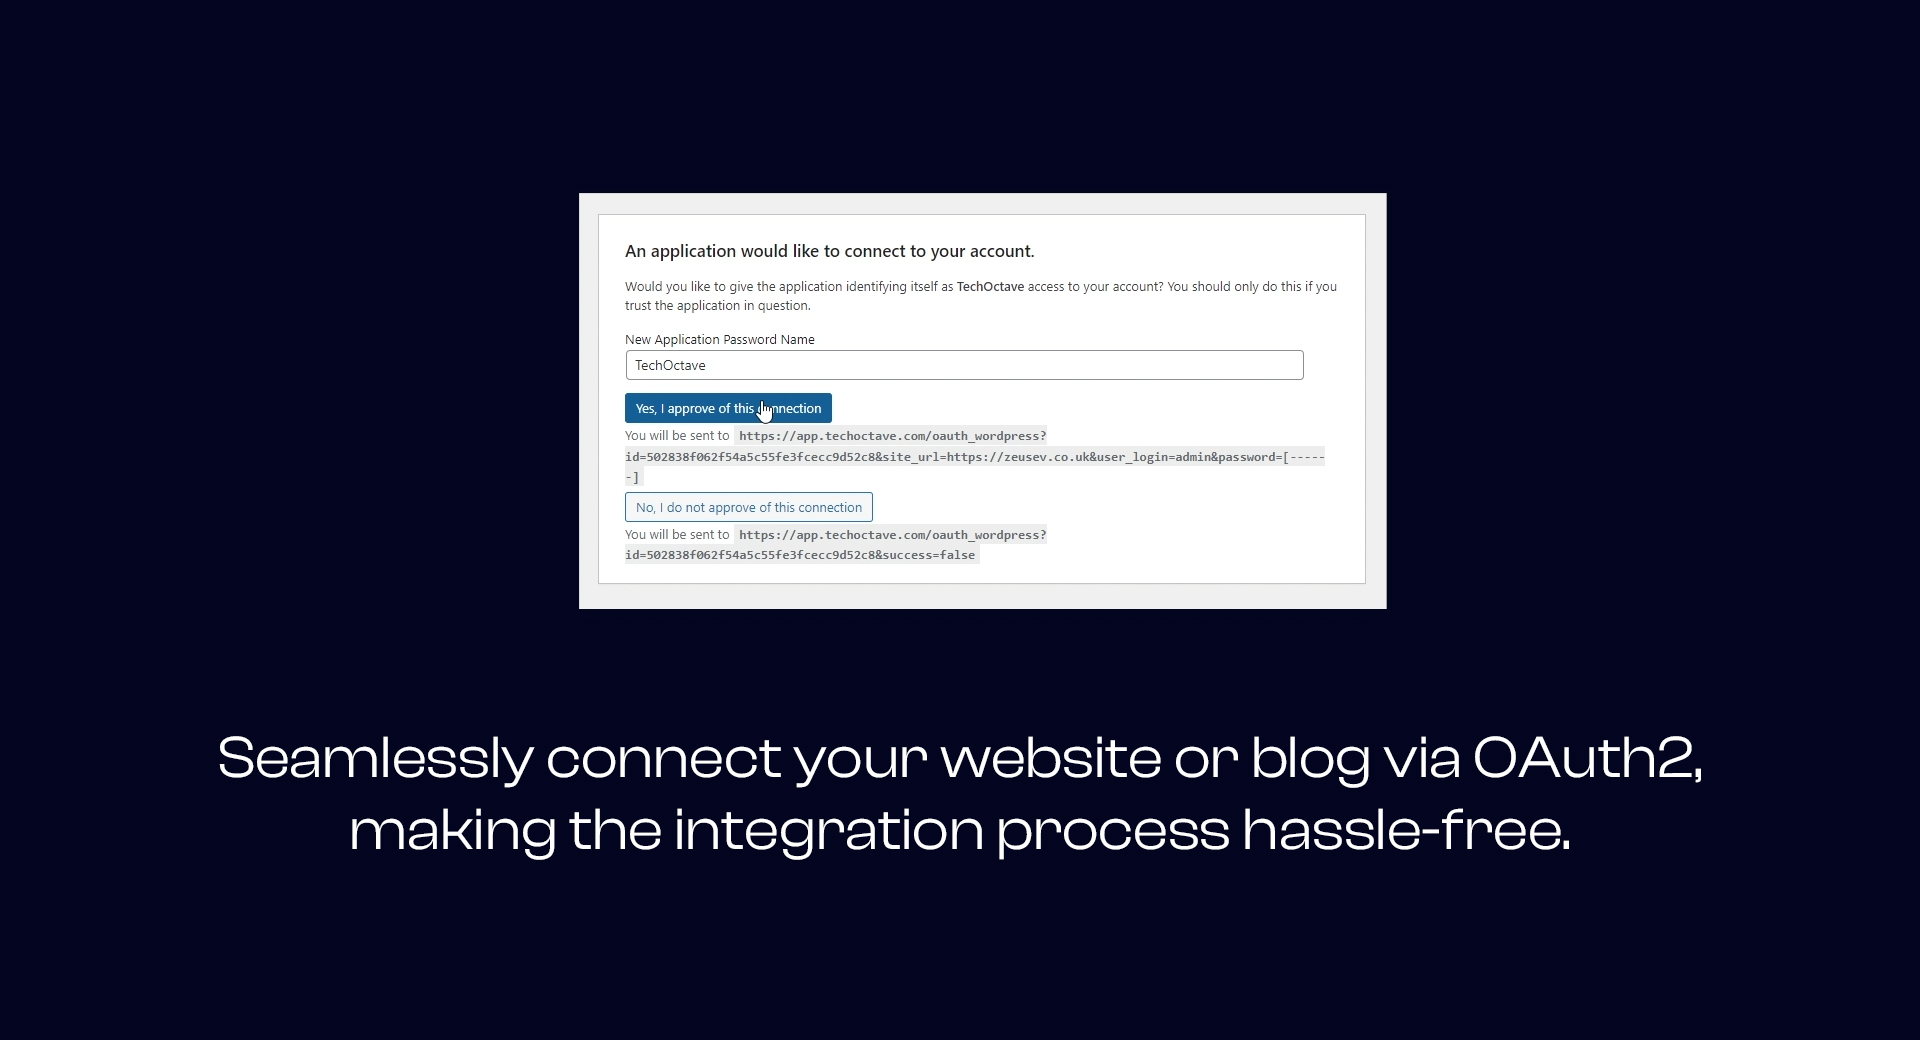 Seamlessly connect your website or blog via OAuth2, making the integration process hassle-free.